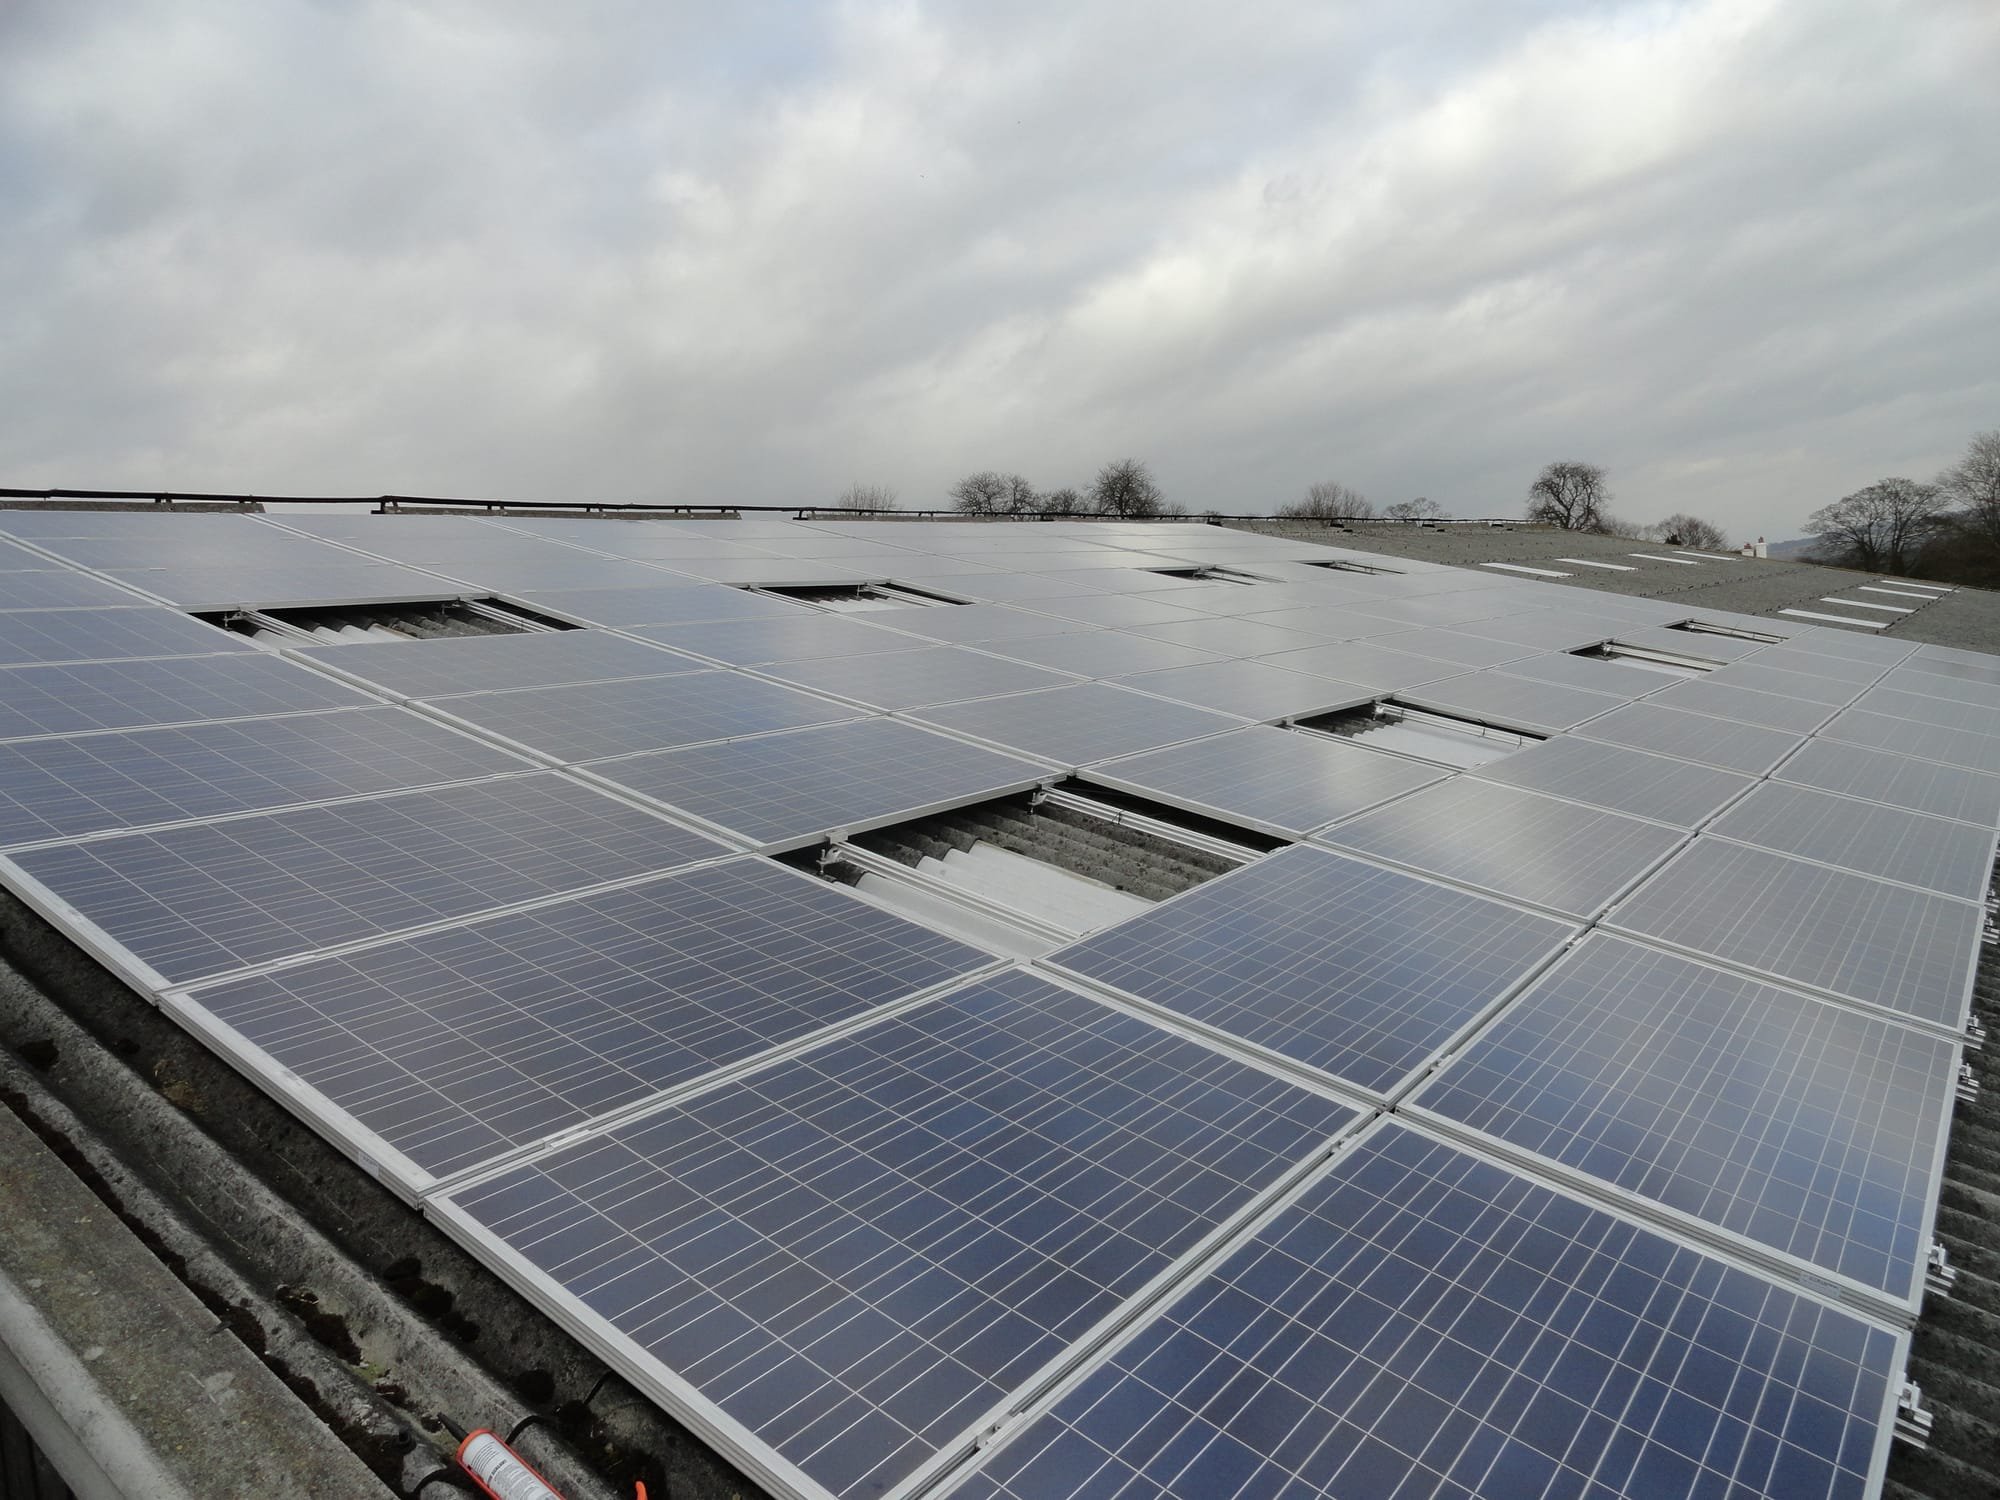 100.0 kWp Solar PV System